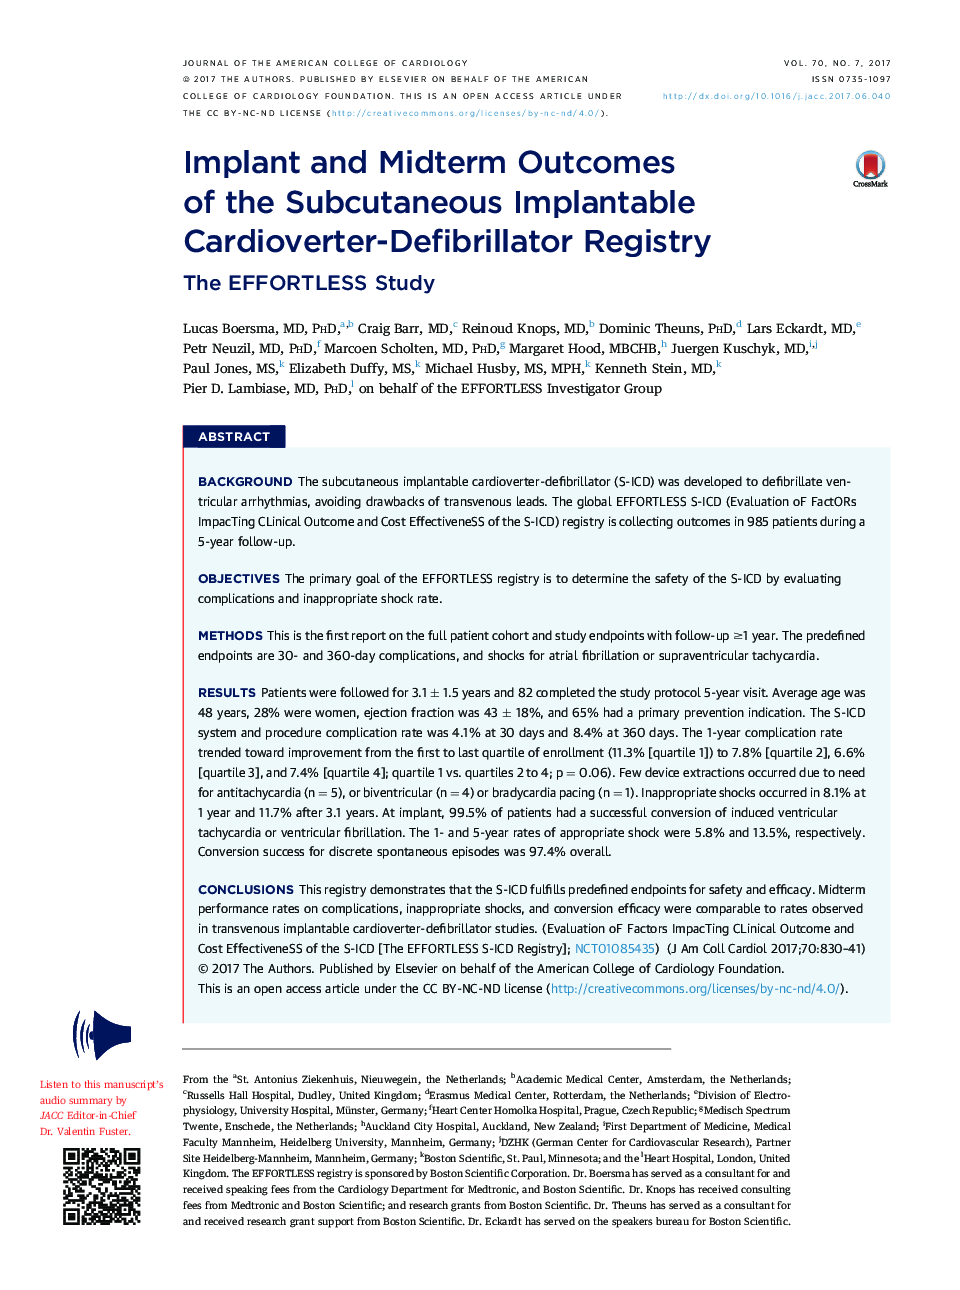 Implant and Midterm Outcomes of the Subcutaneous Implantable Cardioverter-Defibrillator Registry